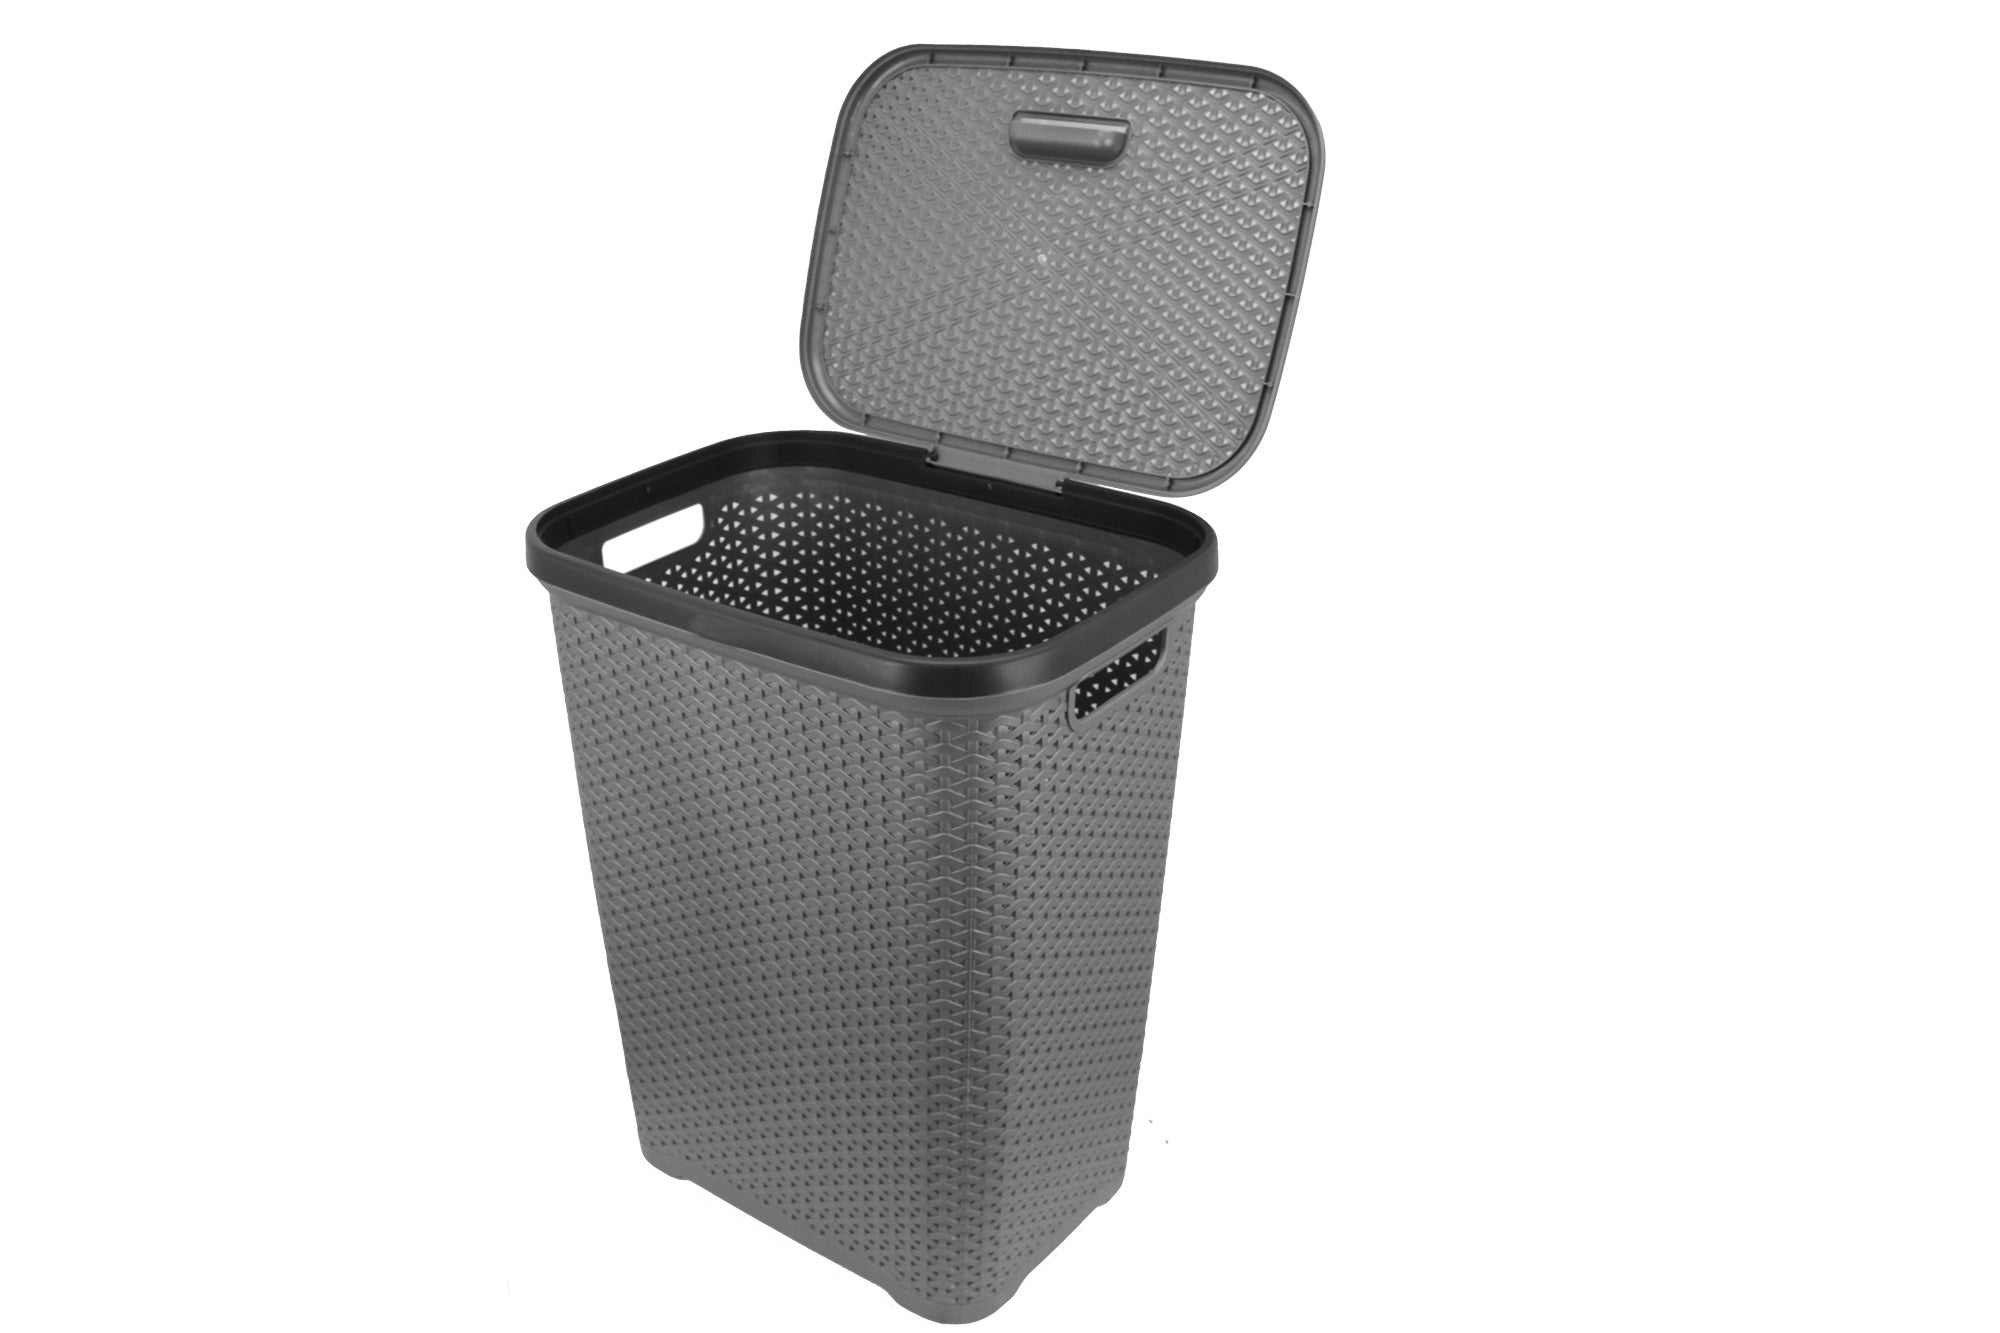 Two Tone Reed Weave Replica PVC Laundry Basket with Hinge Lid